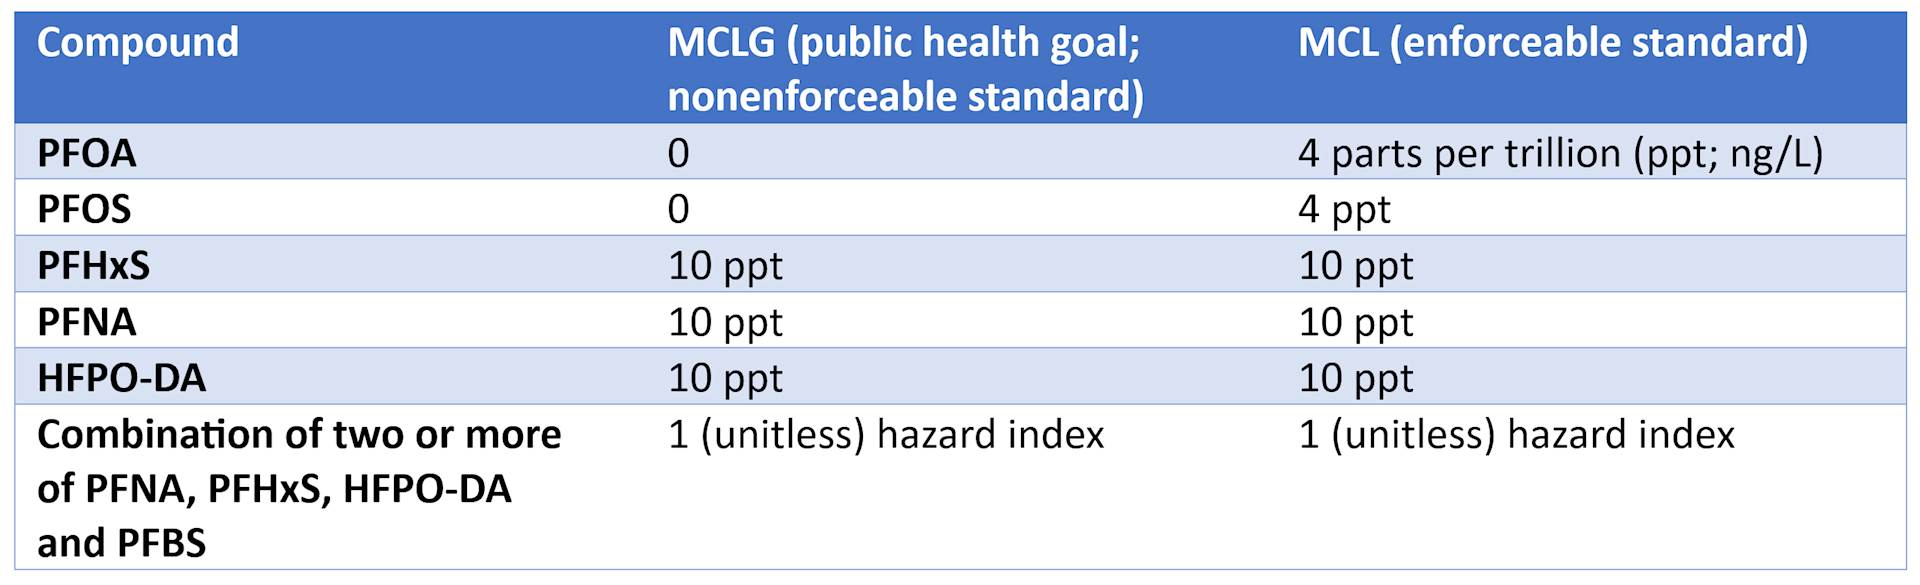 Table with amounts for the U.S. Environmental Protection Agency’s maximum contaminant levels and maximum contaminant level goals for five PFAS compounds, plus a hazard index level for two or more of four compounds as a mixture